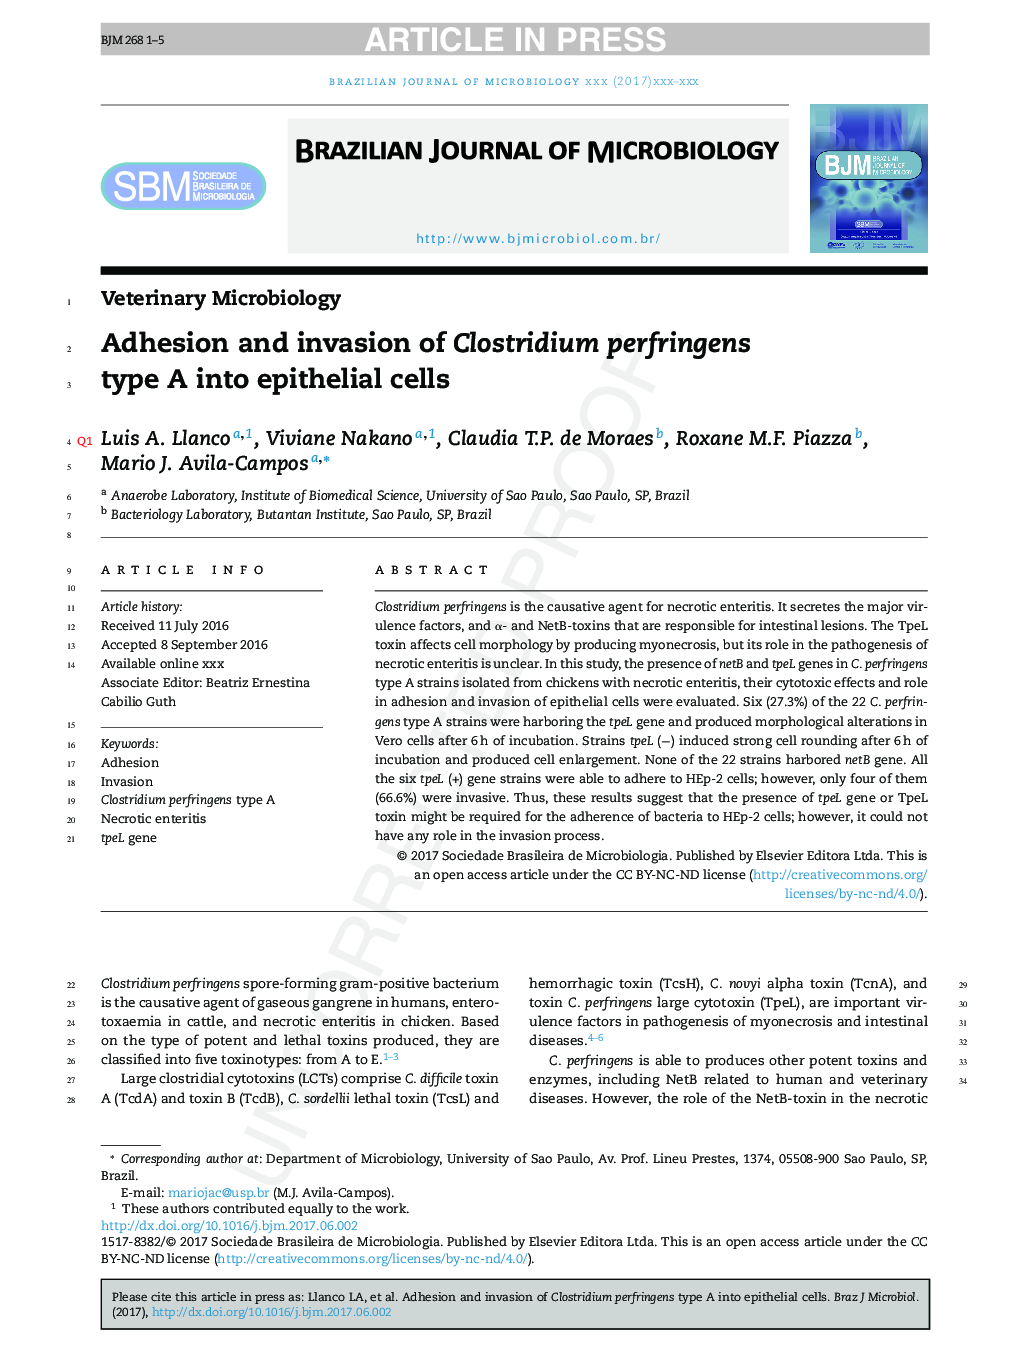 Adhesion and invasion of Clostridium perfringens type A into epithelial cells